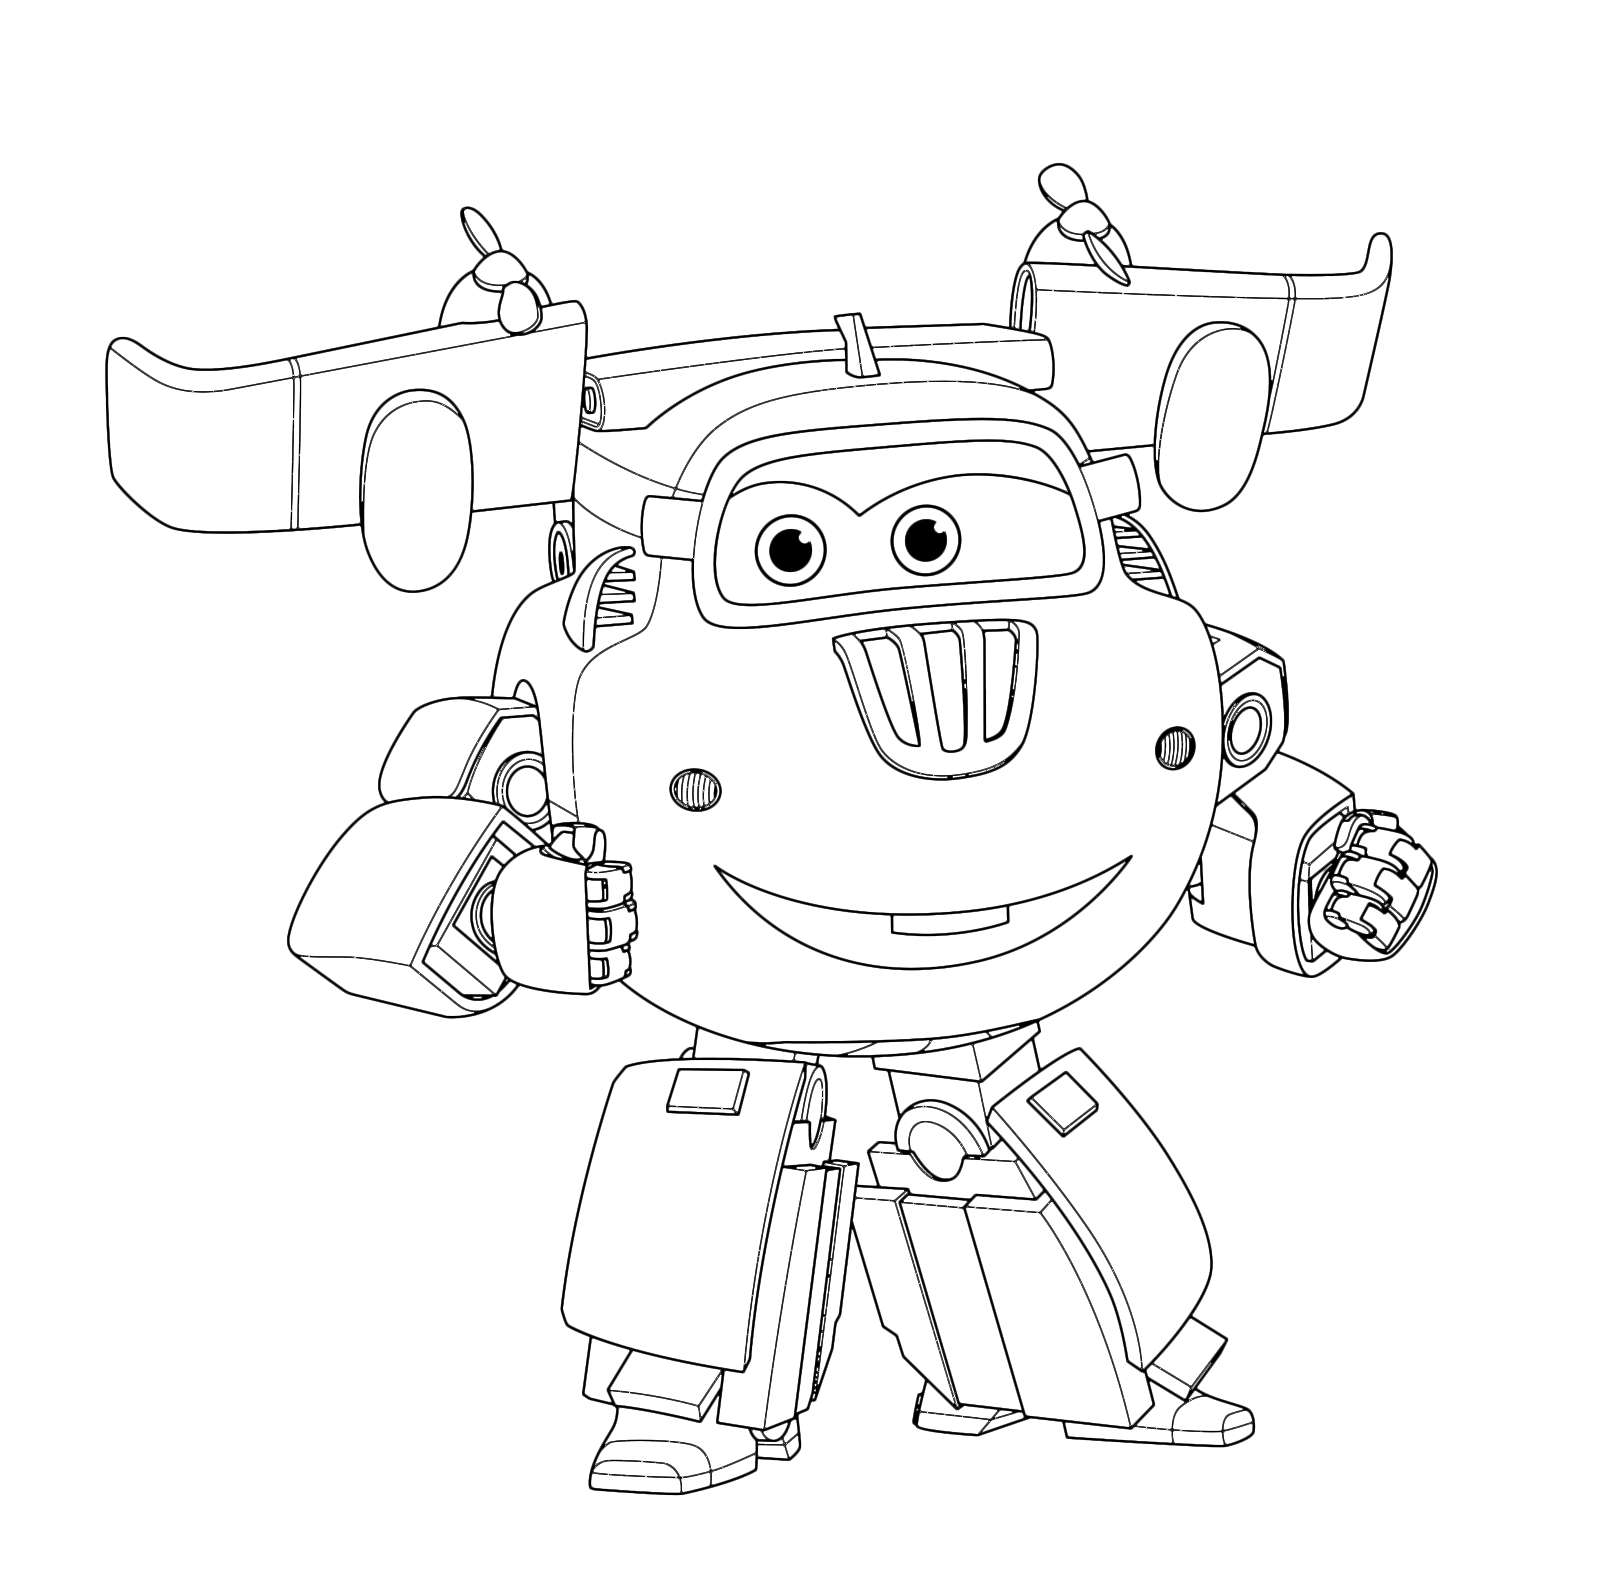 Super Wings Coloring Pages Best Coloring Pages For Kids